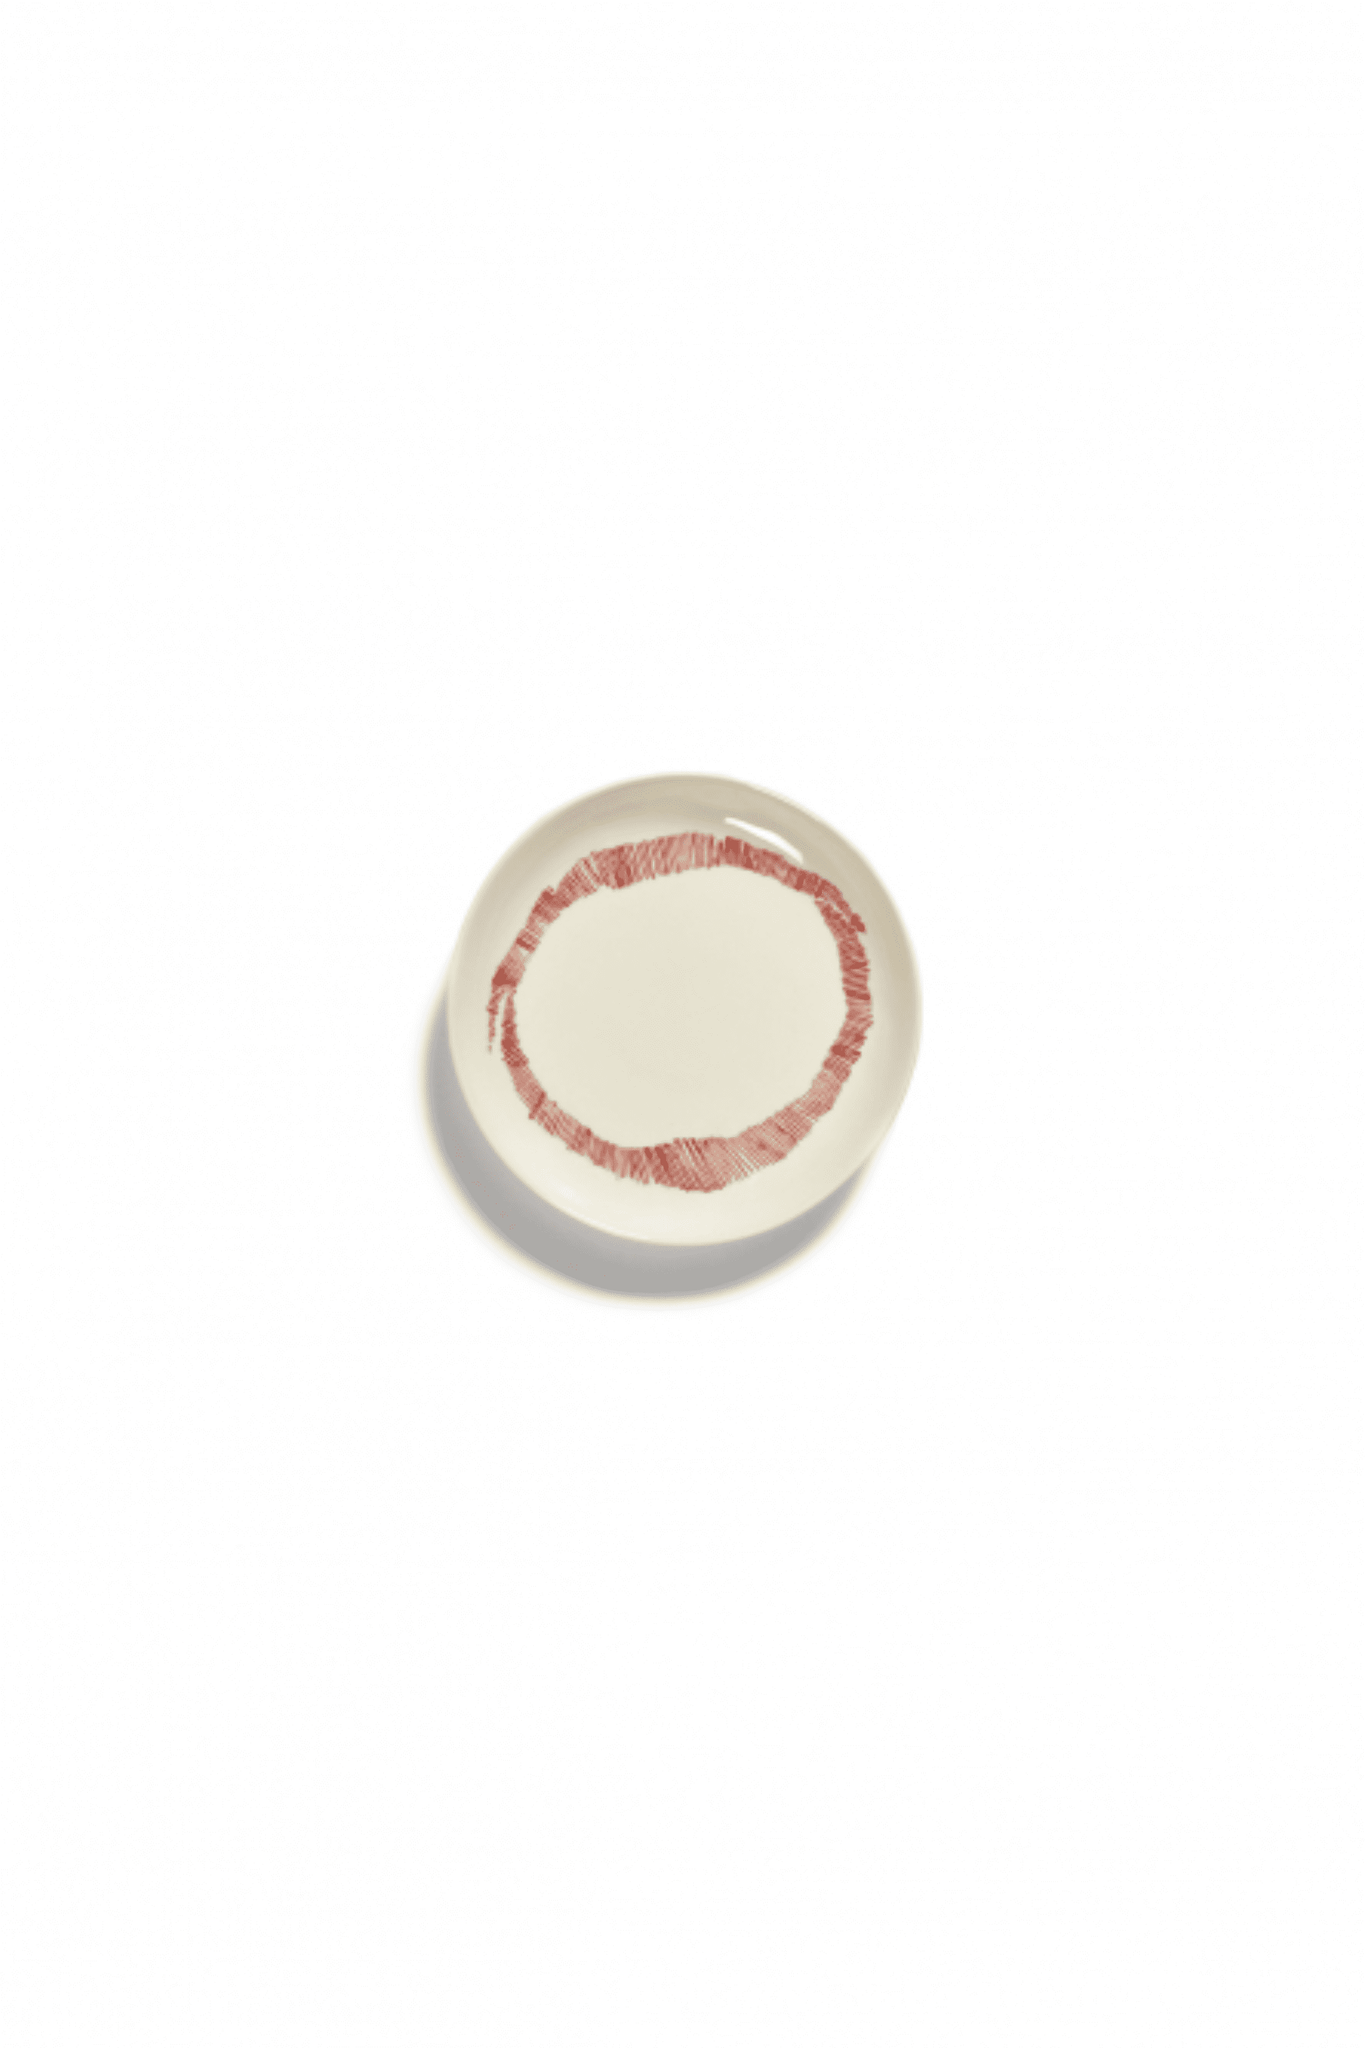 X-Small Plate, White Swirl with Red Stripes Ottolenghi Serax, top view